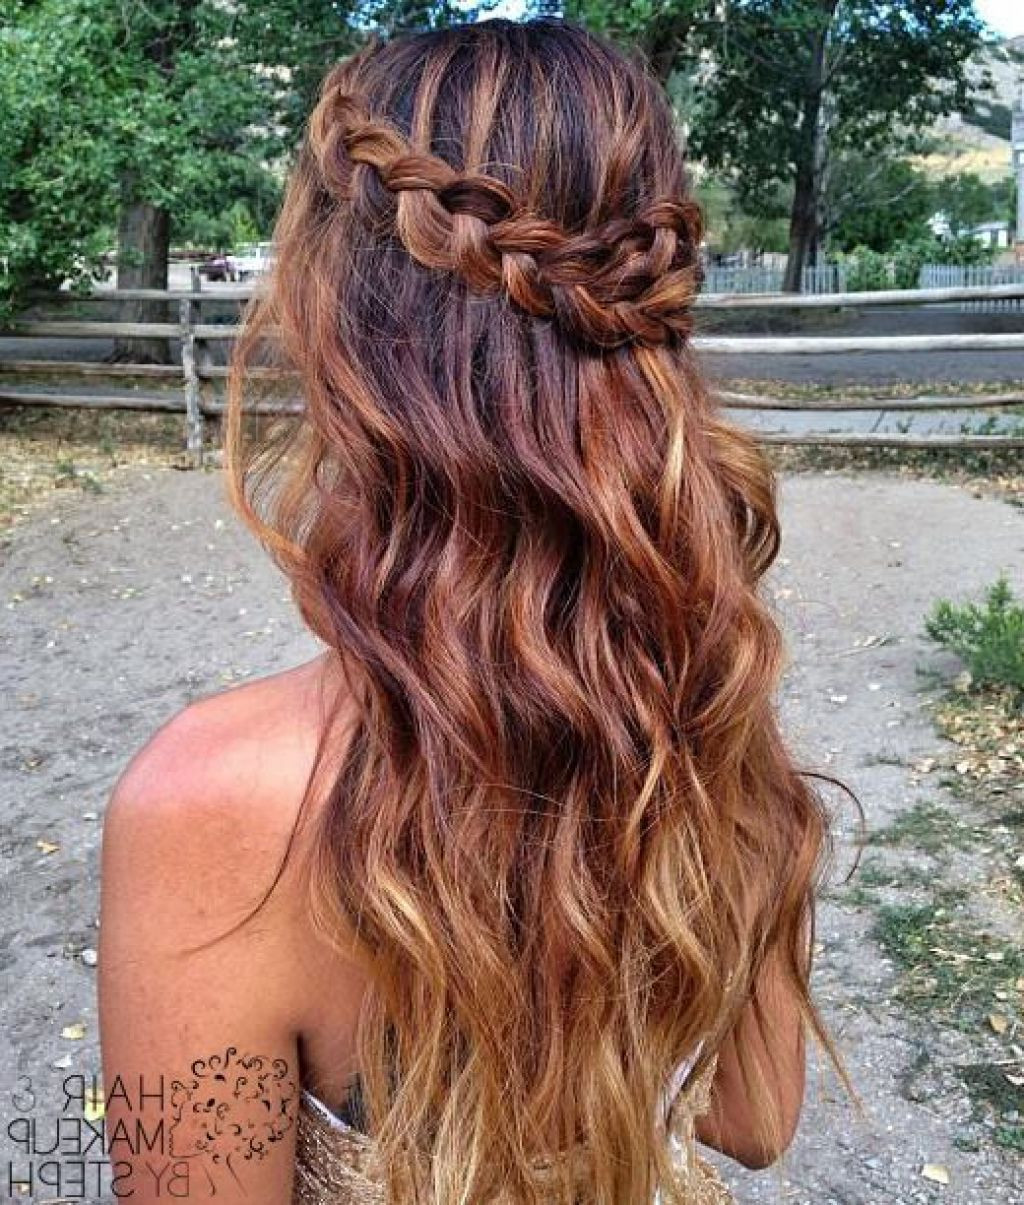 Best ideas about Prom Hairstyle Pinterest
. Save or Pin Half Up Half Down Prom Hairstyles Hairstyle Now.